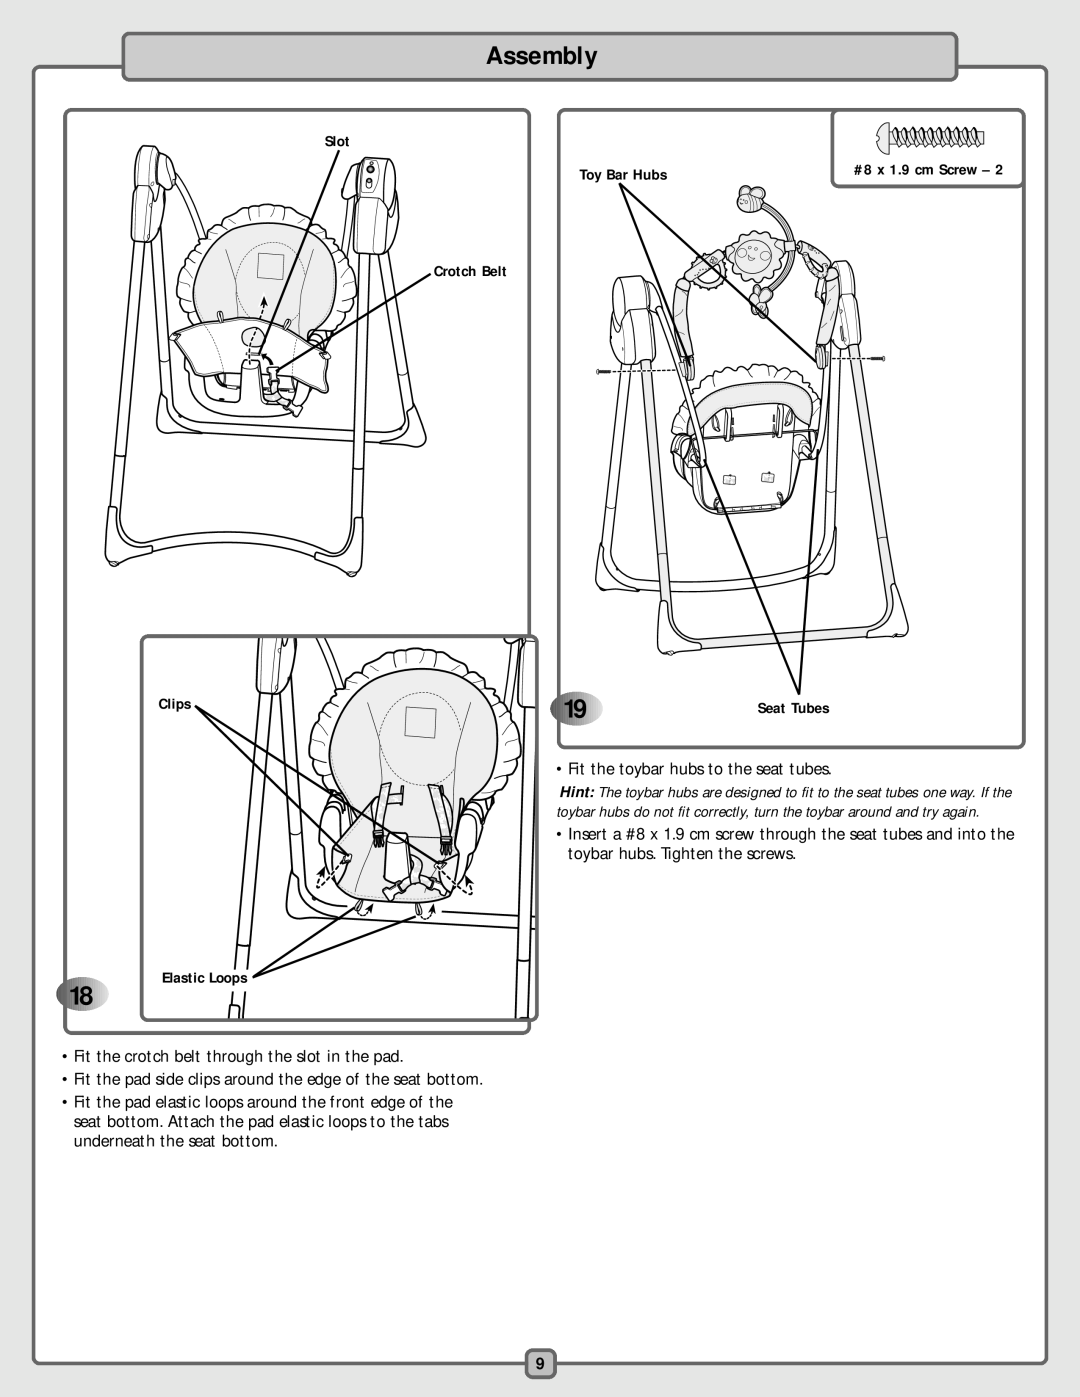 Fisher-Price H4792 manual Assembly, Fit the toybar hubs to the seat tubes 